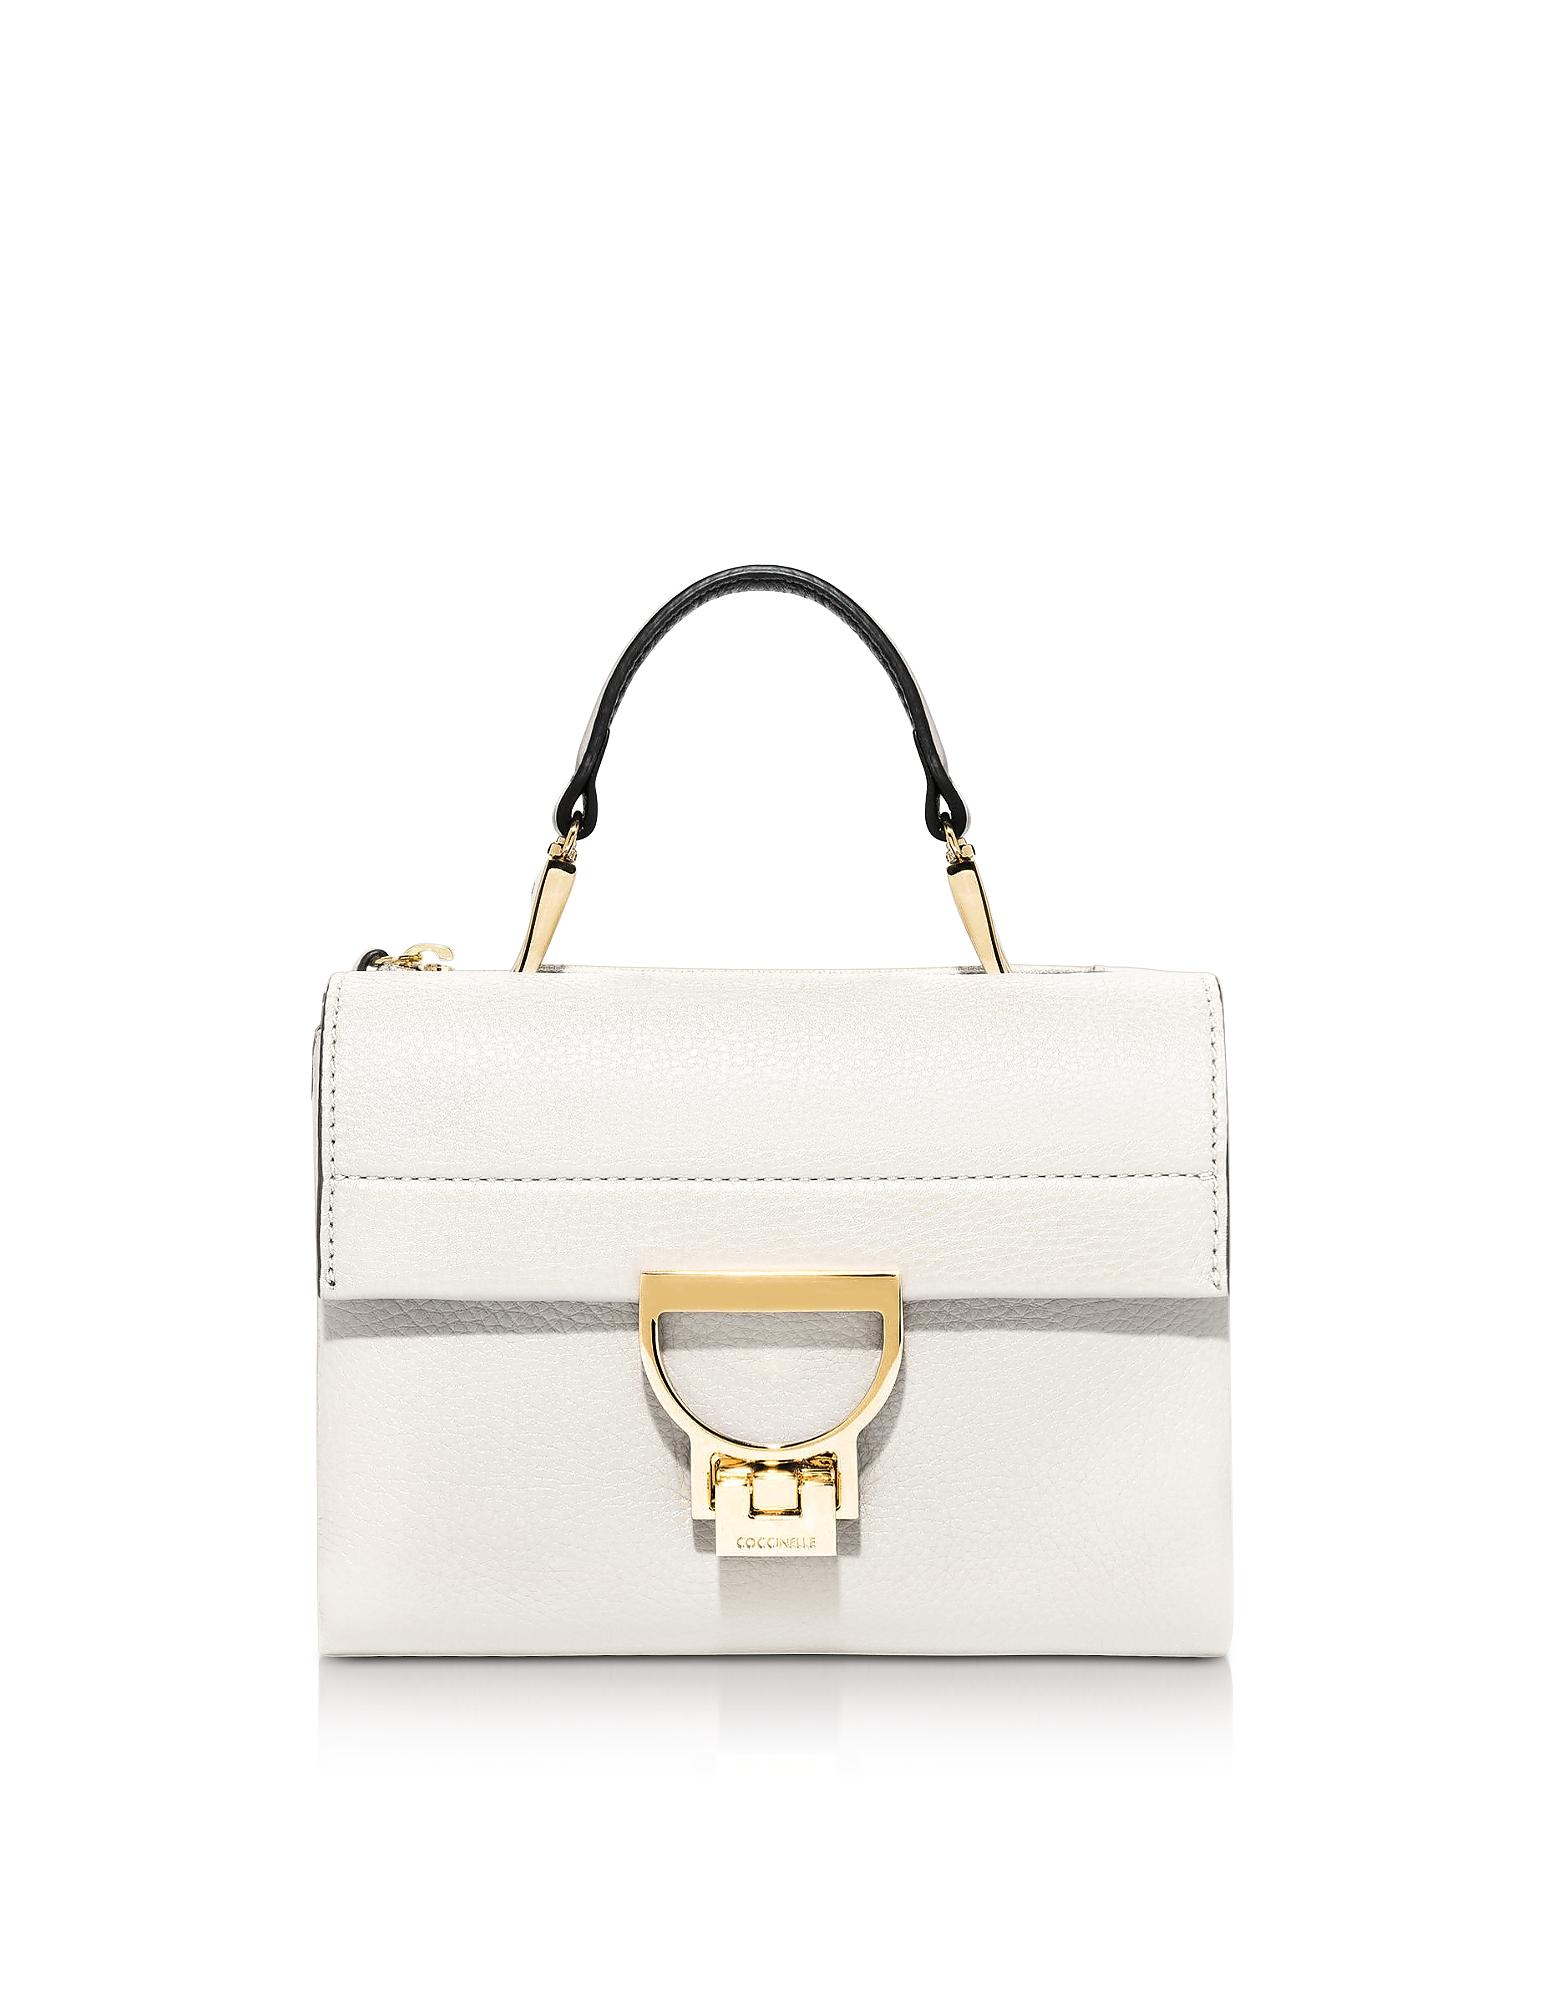 Coccinelle Arlettis Mini Leather Shoulder Bag in White - Lyst